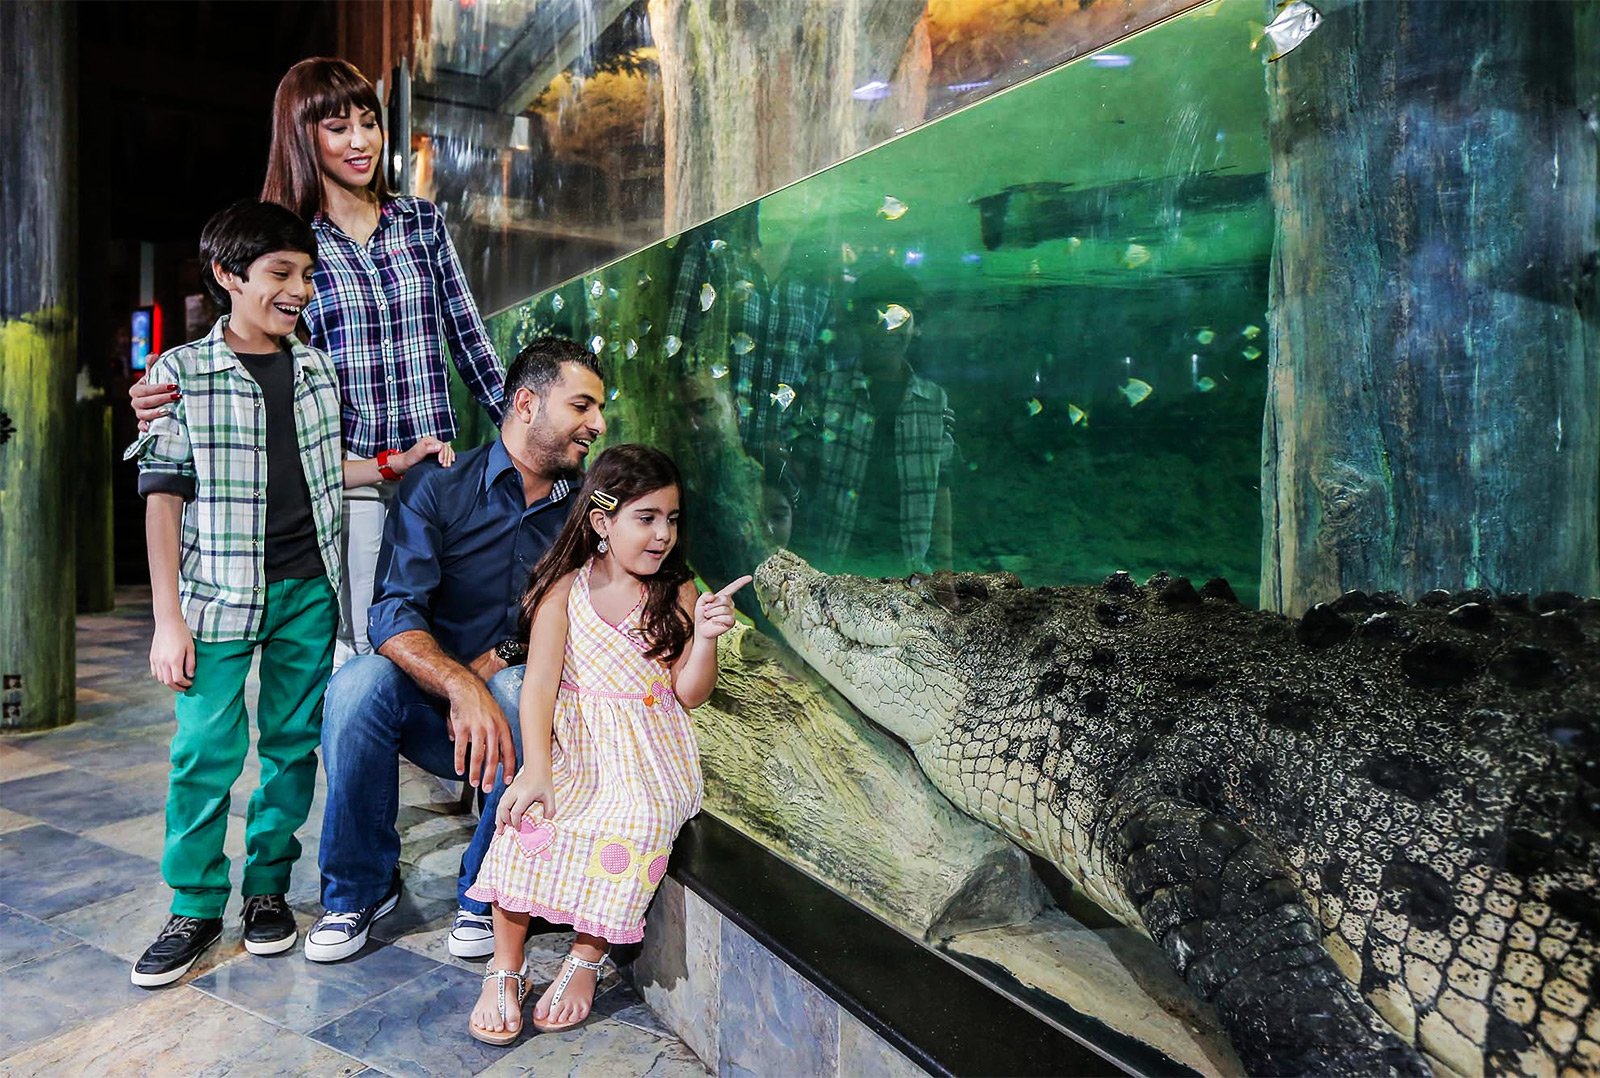 How to see the King Croc in Dubai